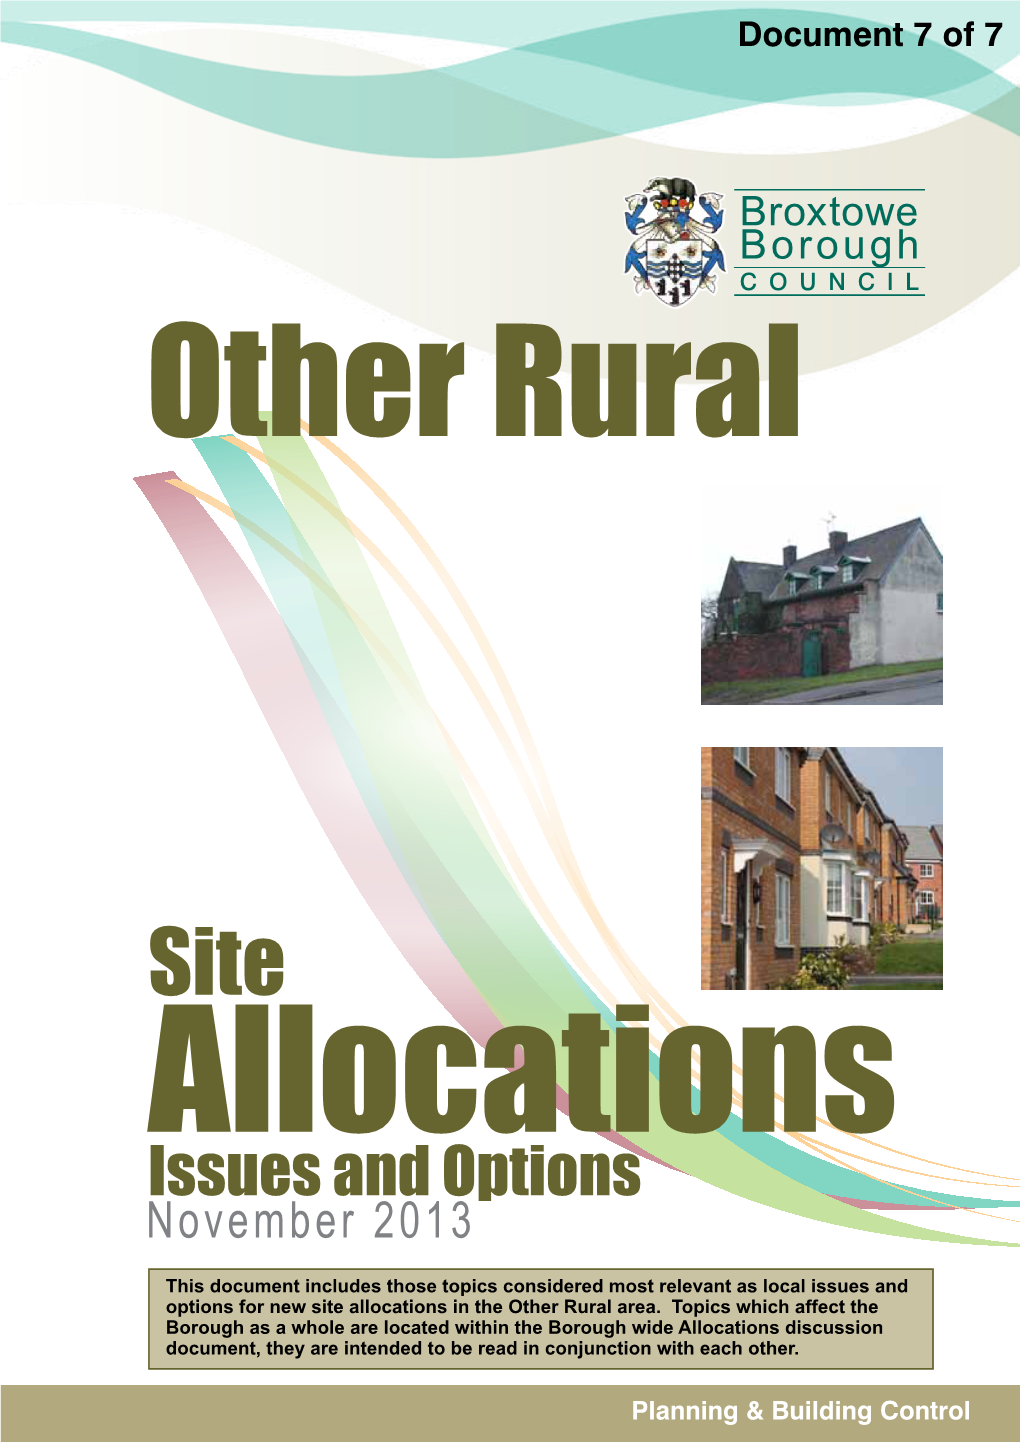 Issues and Options for New Site Allocations in the Other Rural Area